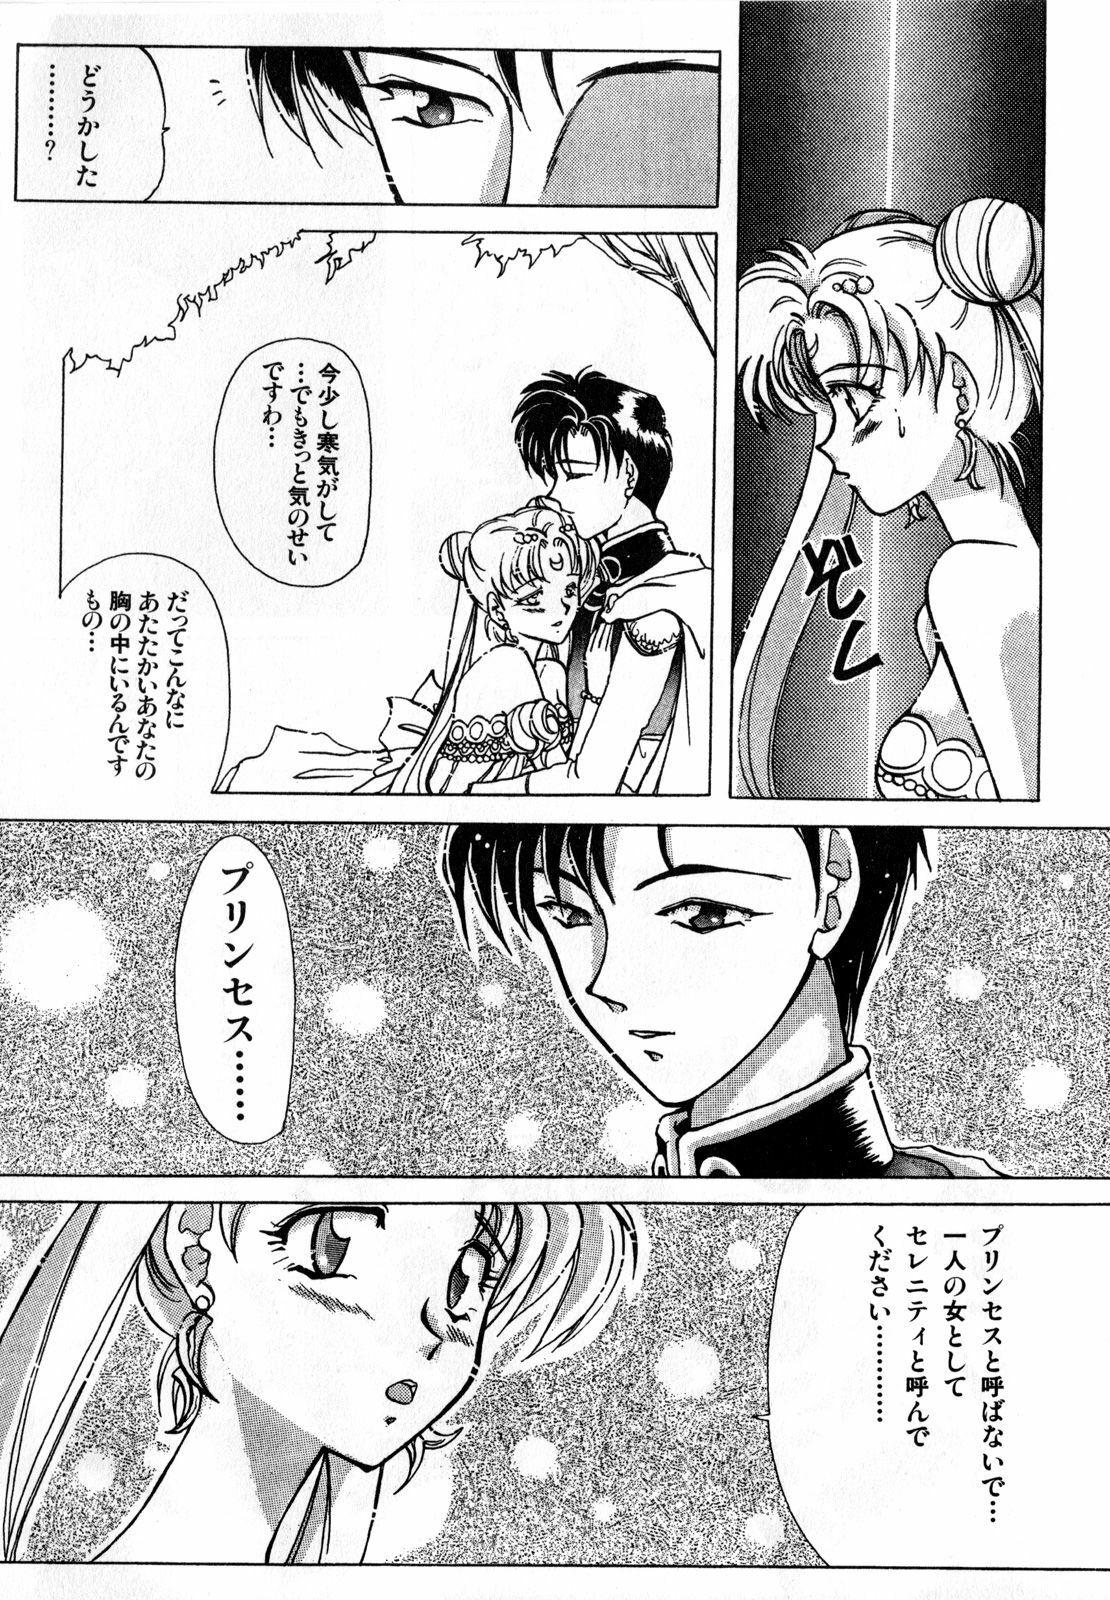 [Anthology] Lunatic Party 1 (Sailor Moon) page 47 full